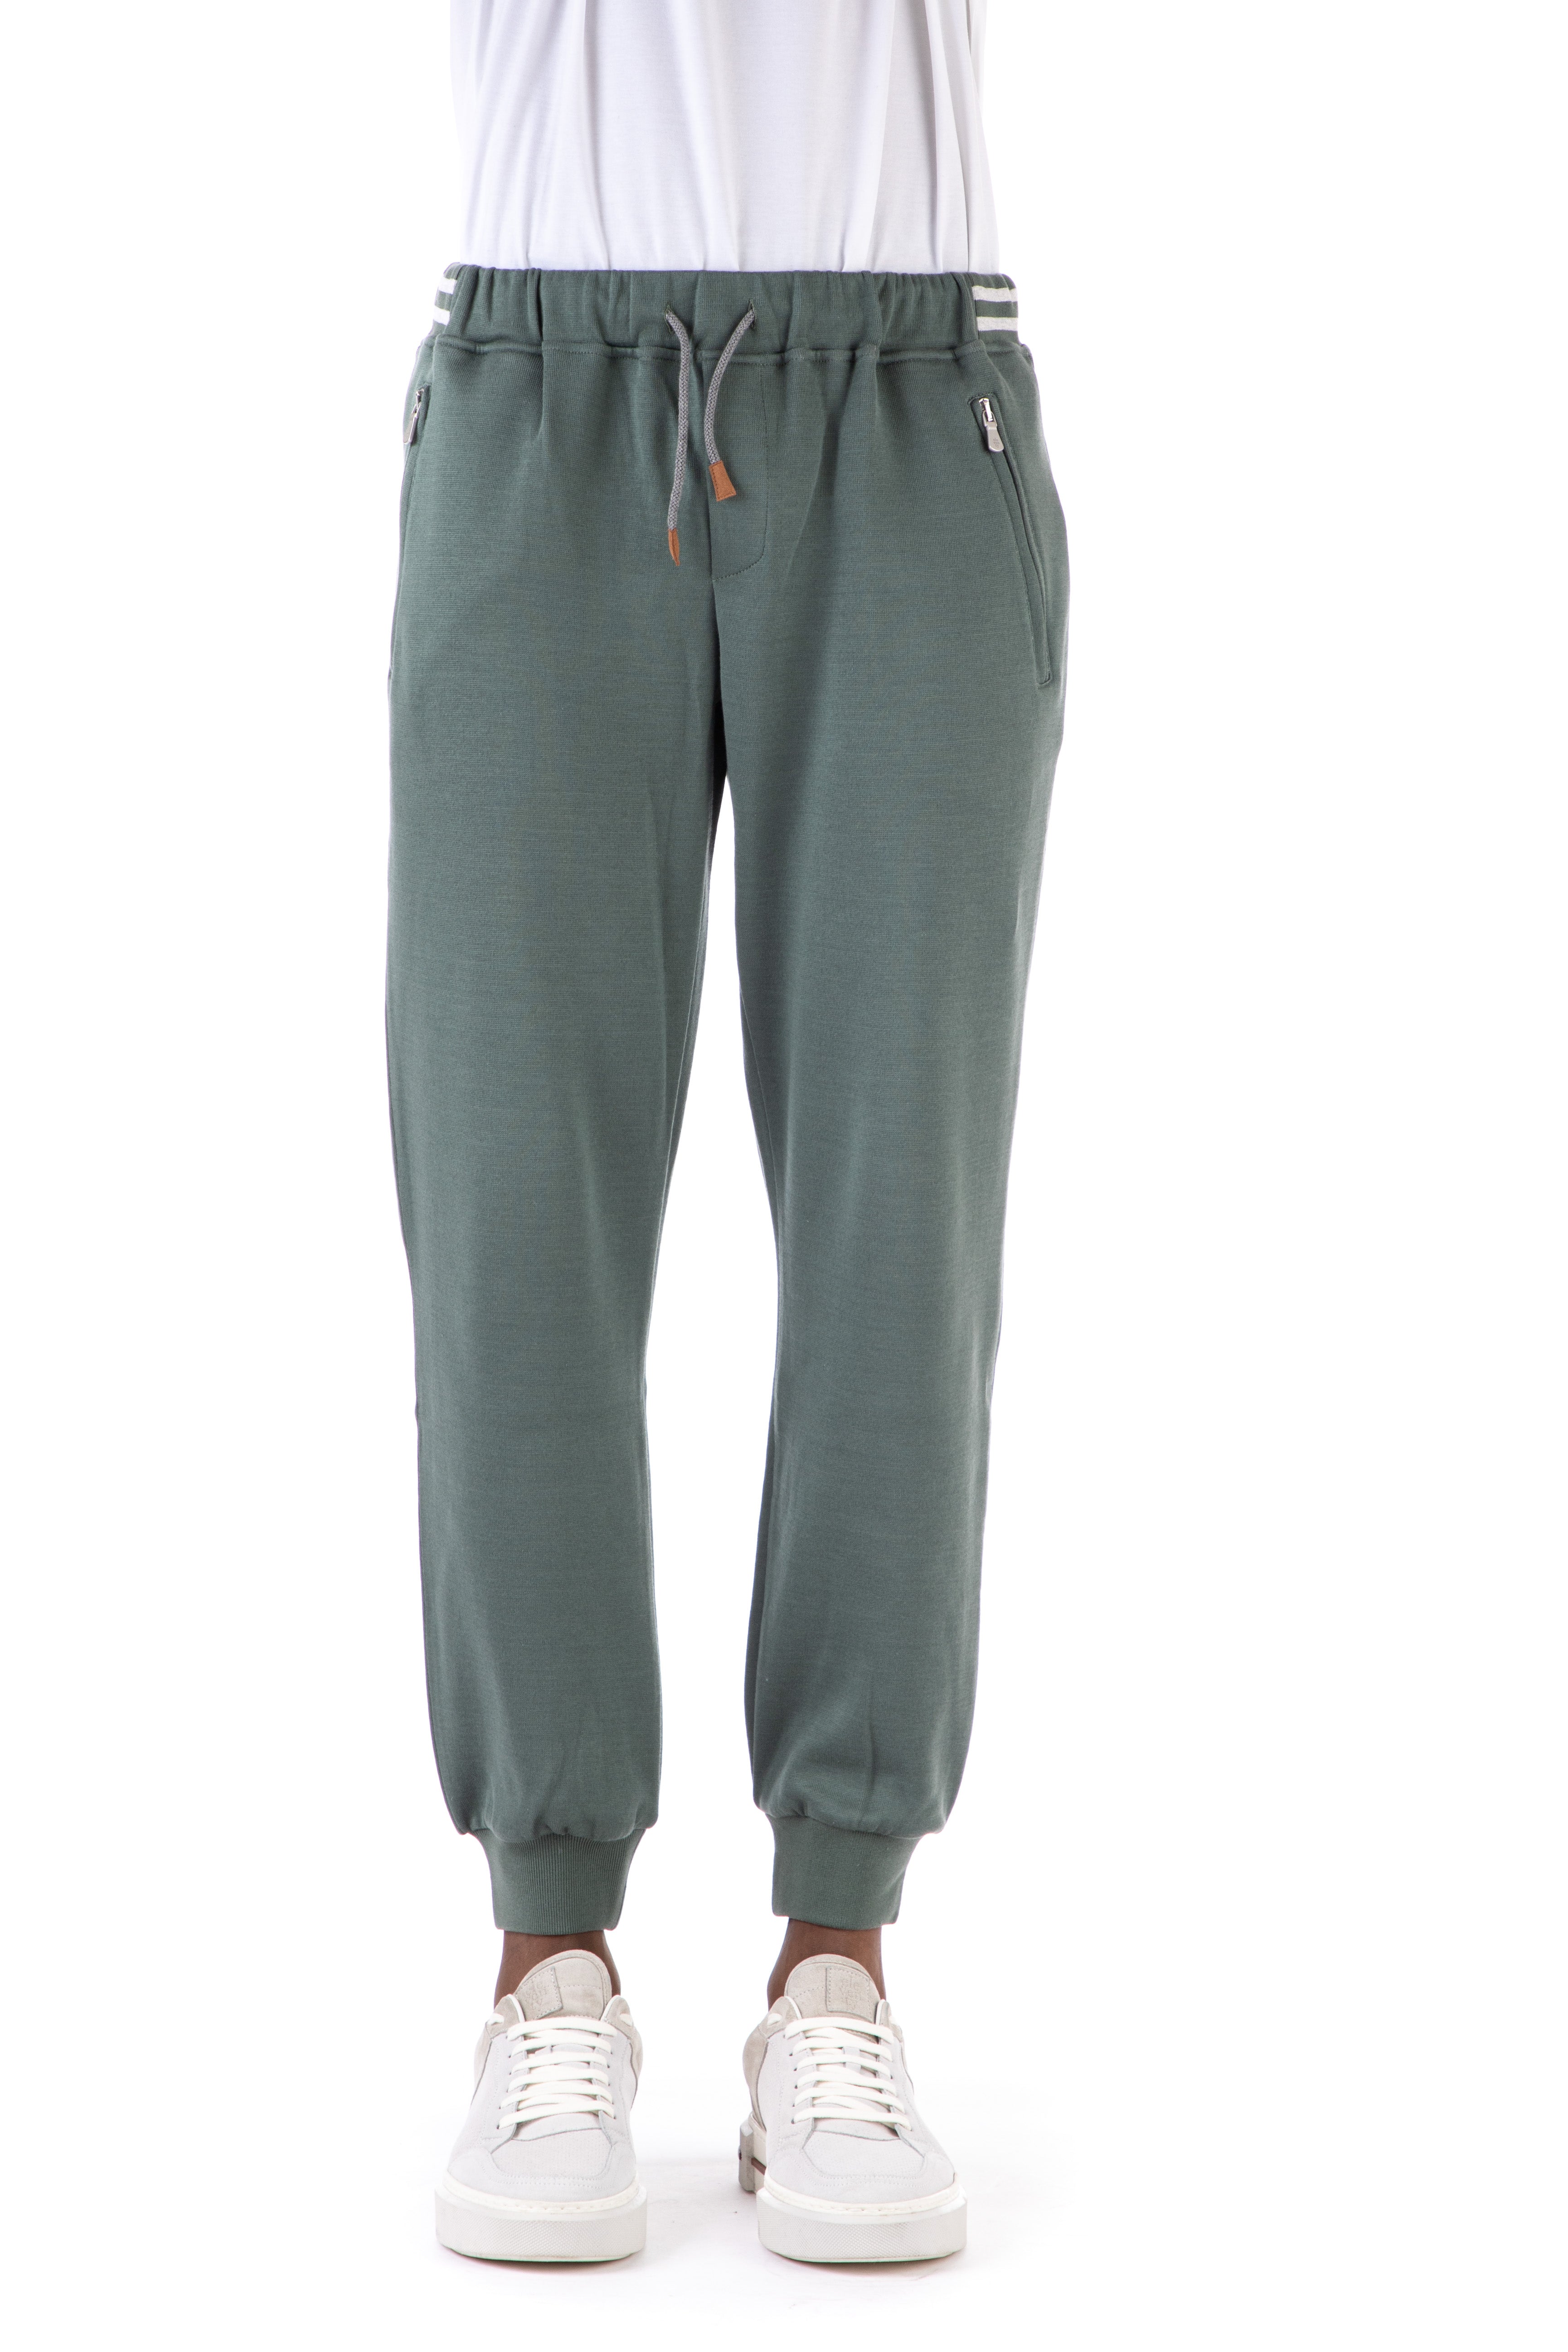 Cotton sweatpants with contrasting bands